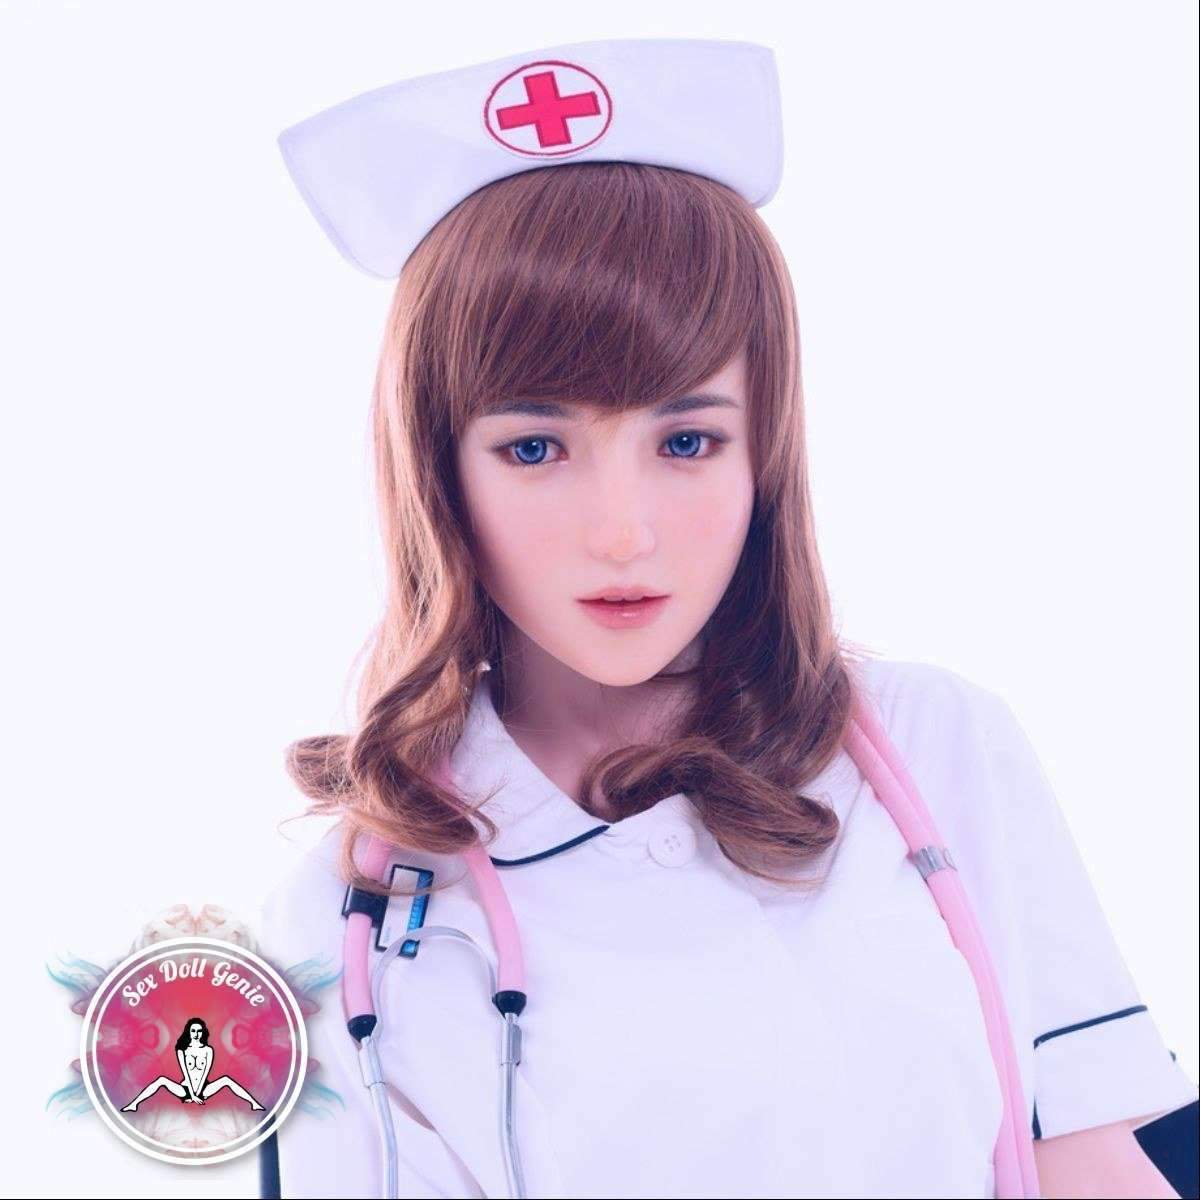 DS Doll - 167cm - Jiaxin Head - Type 1 D Cup Silicone Doll-3